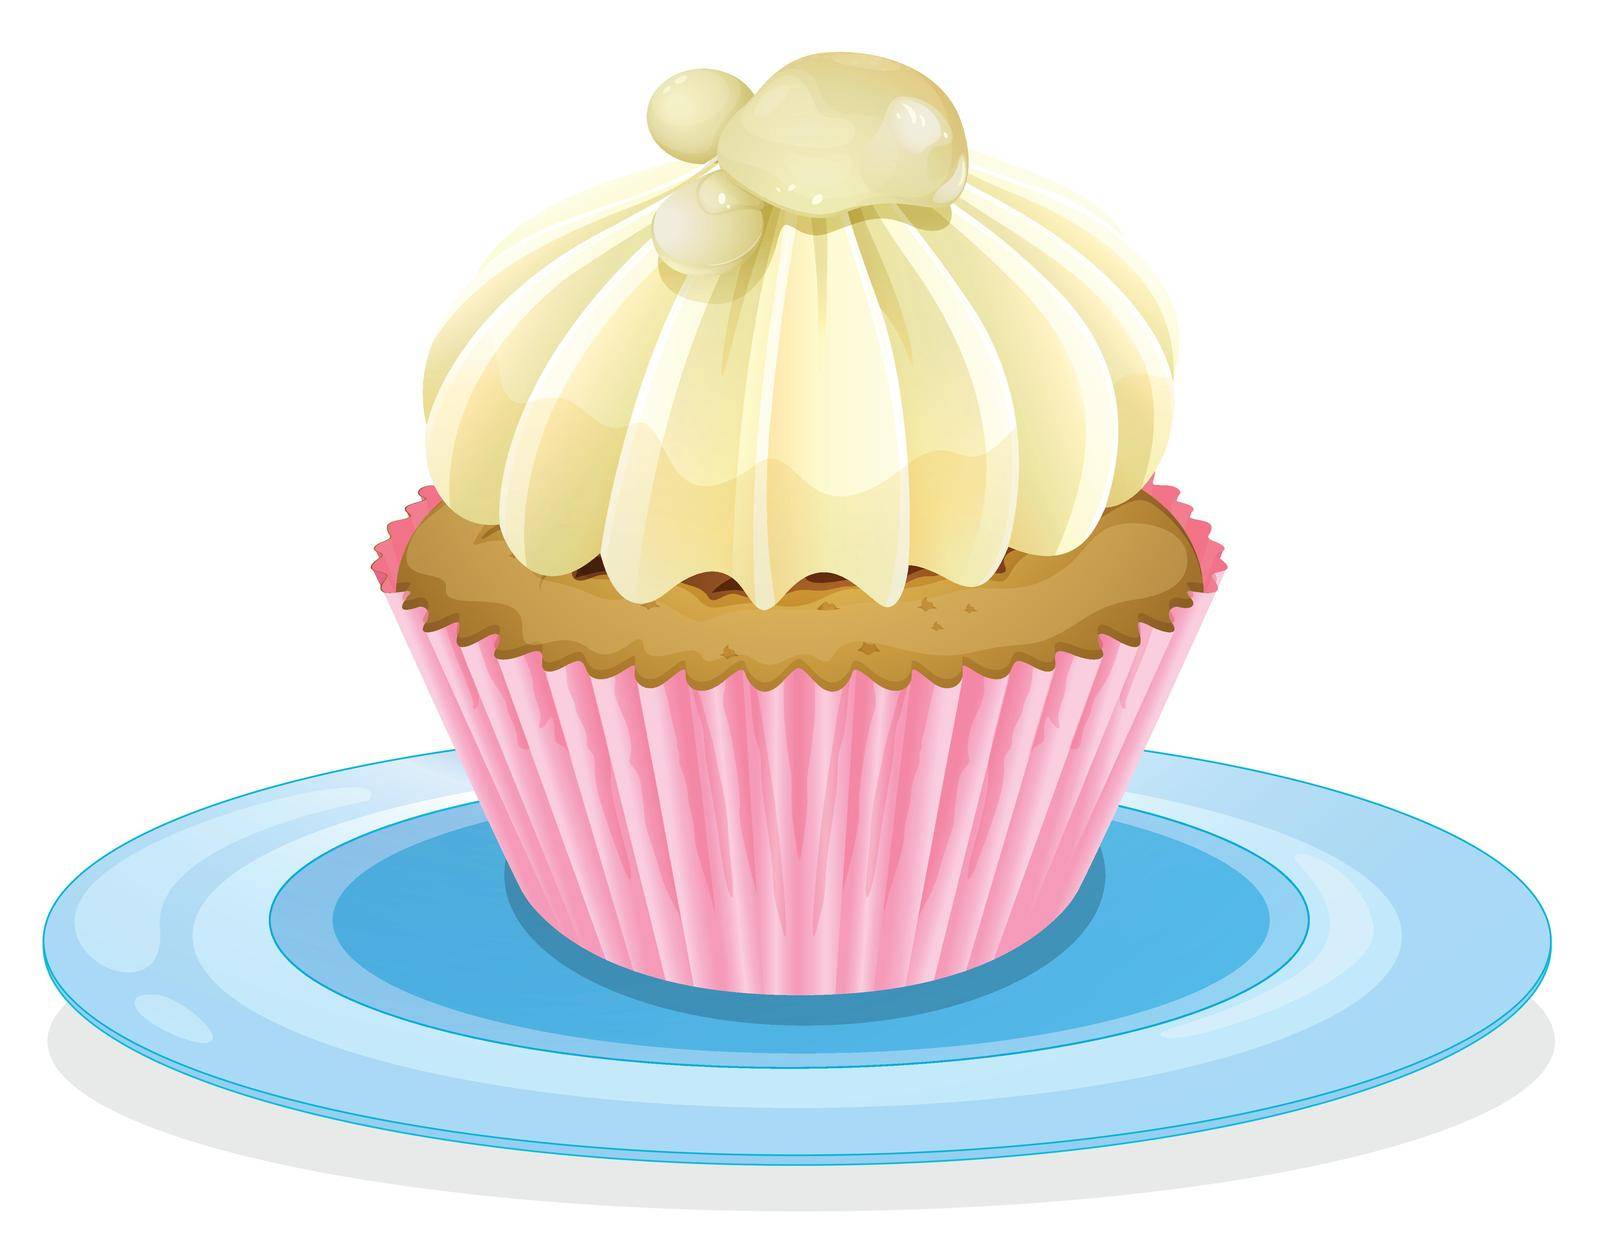 illustration of a cupcake on a white background